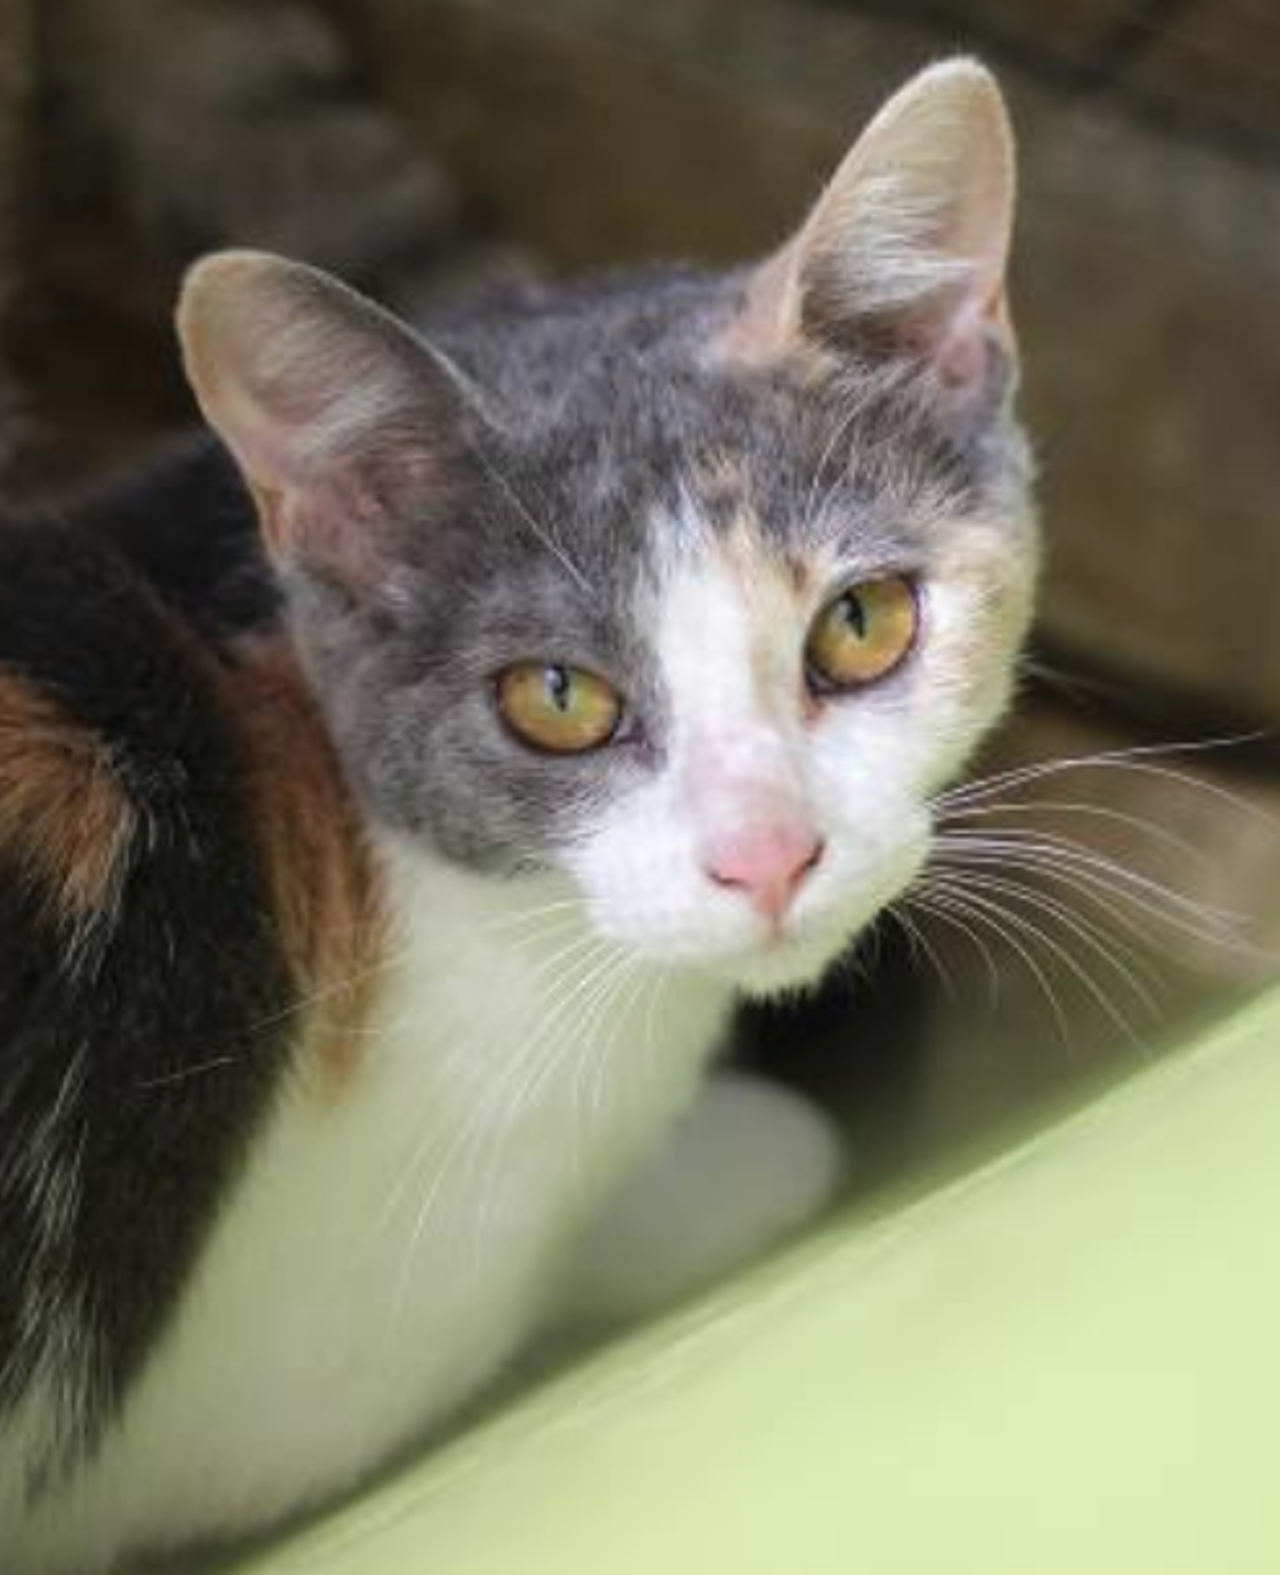 Rainbow
"Rainbow is a great name for me. I am beautiful to look at but can be elusive. I am very bashful and being in the Cattery is overwhelming. I could really use a quiet, calm home and I'm sure you'll be finding the pot of gold at the end my Rainbow soon!"